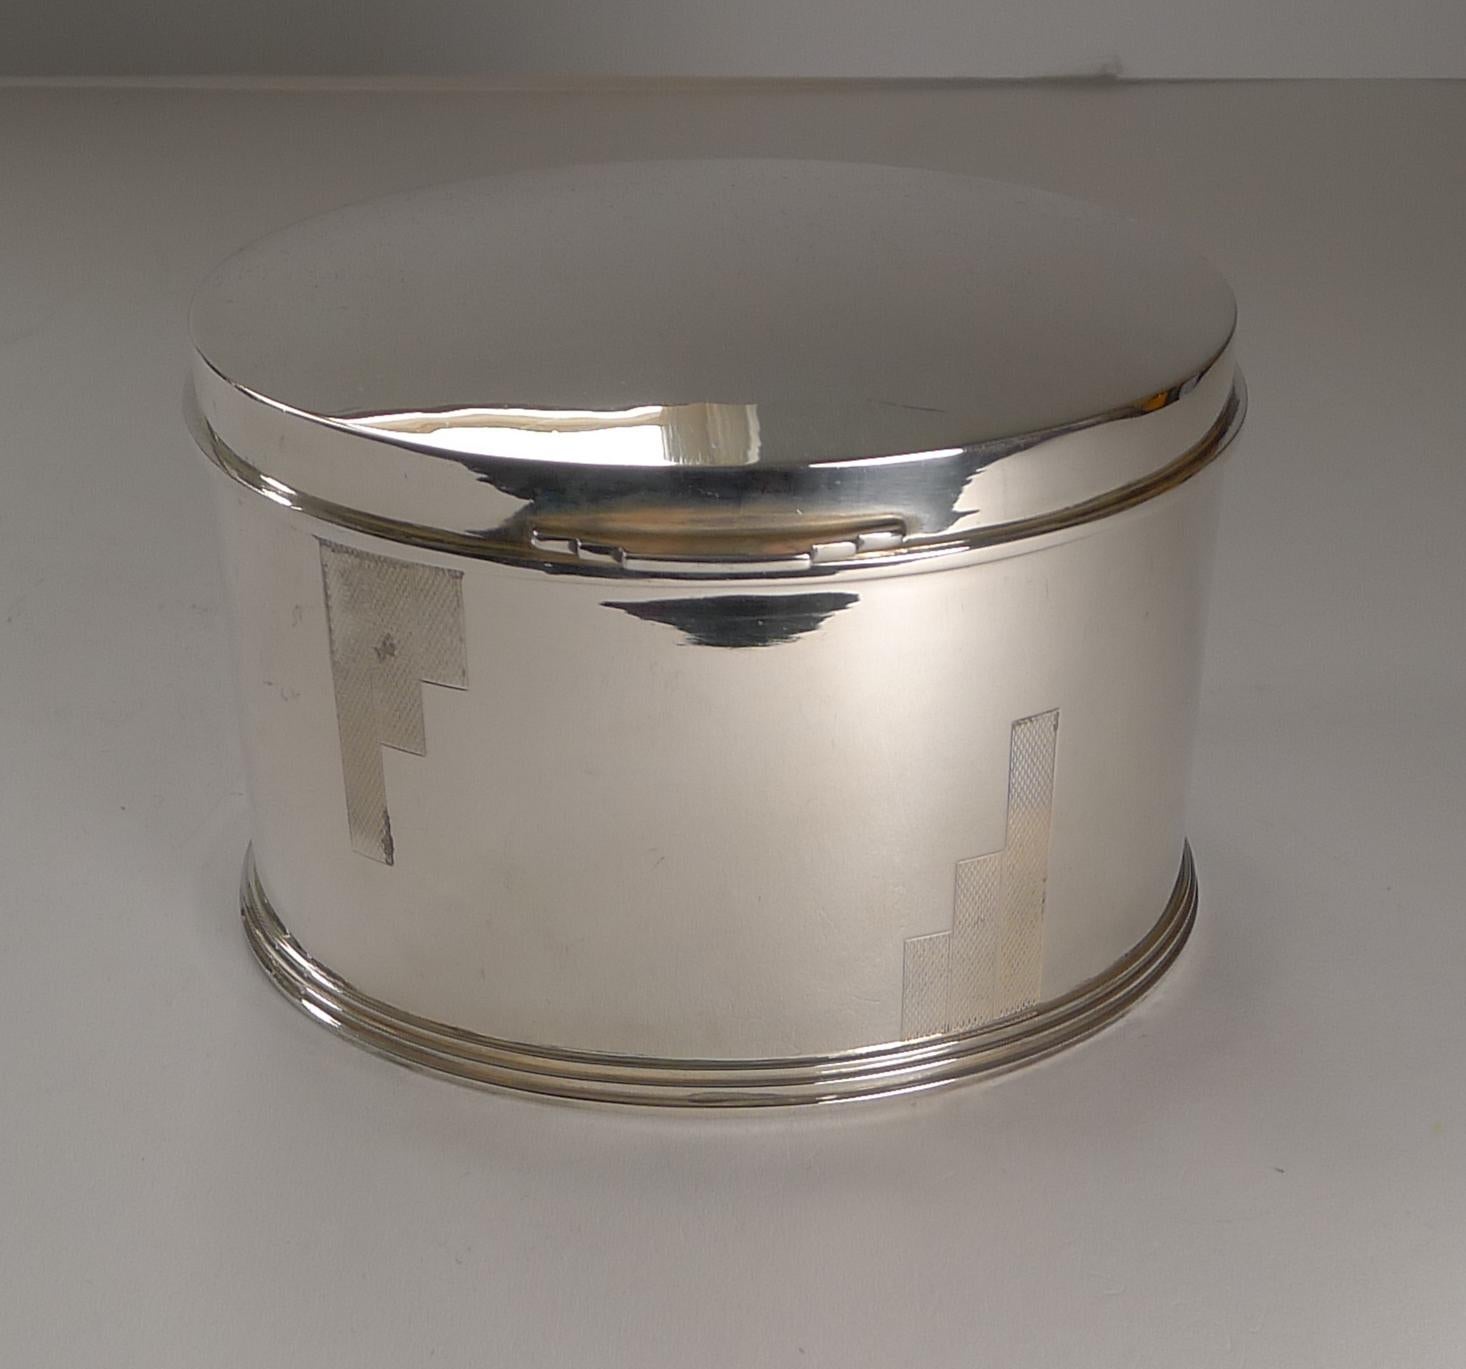 Just returned from our silversmith's workshop where it has been professionally cleaned and polished, restoring it to it's former glory.

The oval box has an engine turned geometric design to both front and back; the lift to the front is also